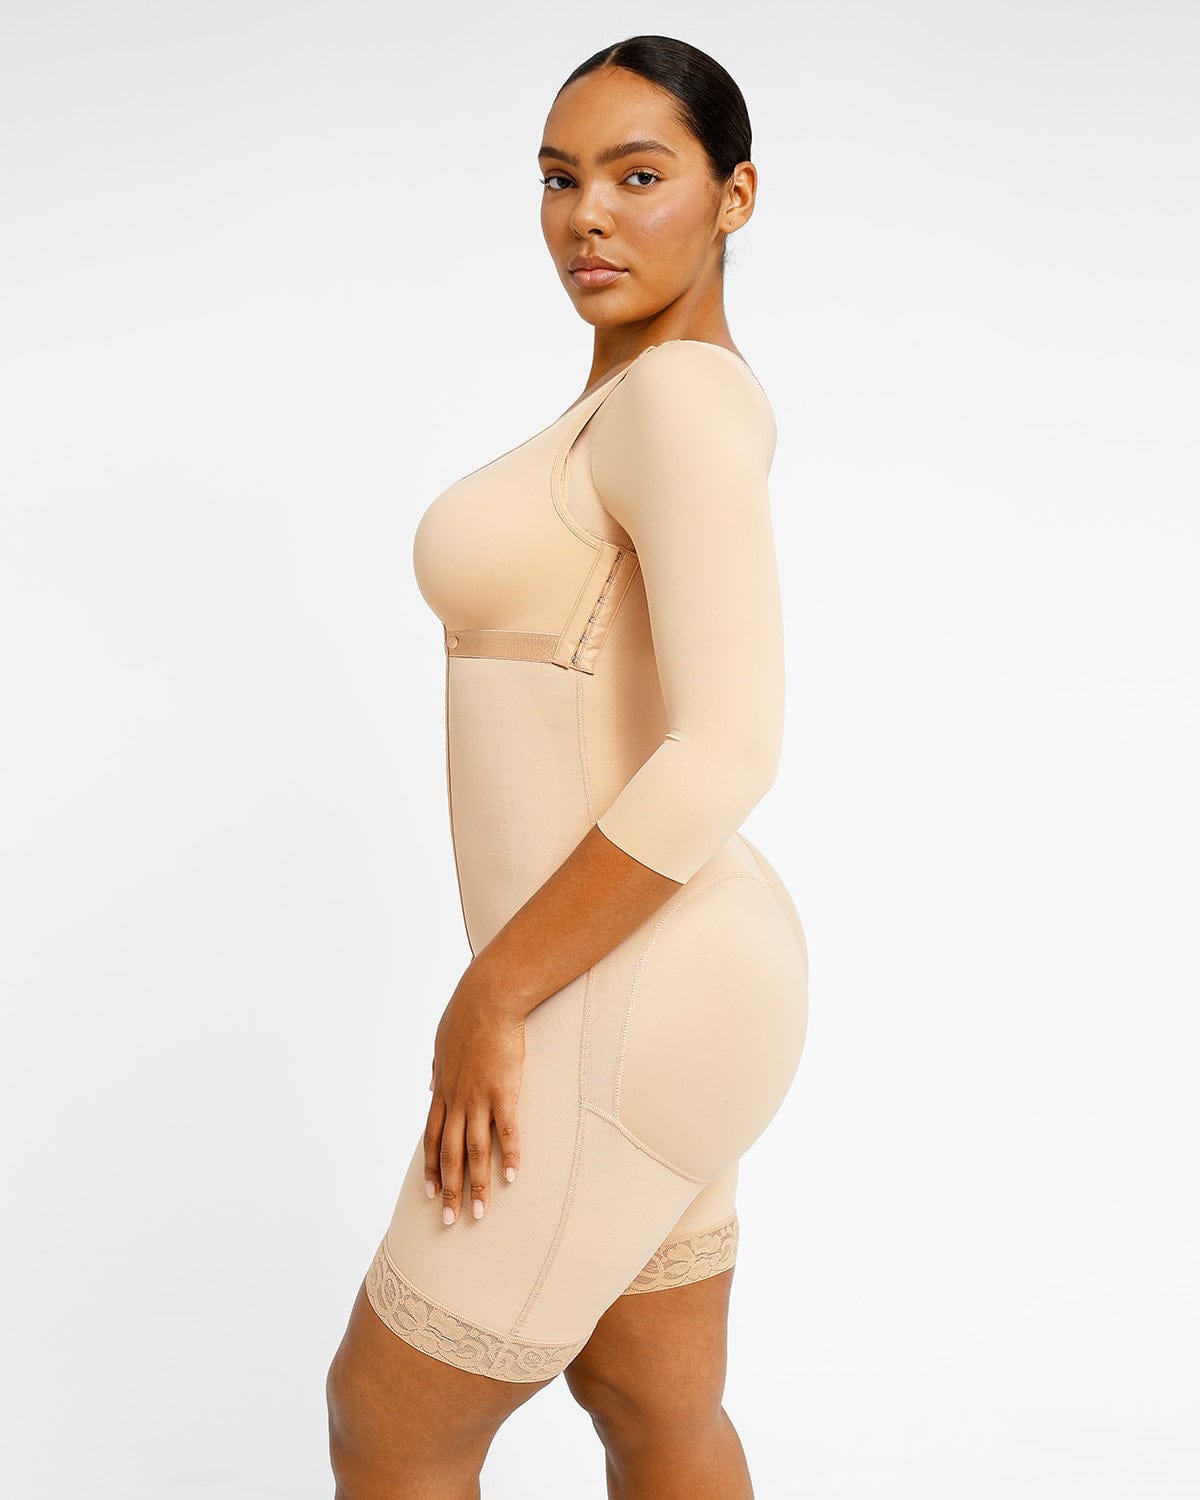 AirSlim™ Firm Tummy Compression Bodysuit Shaper with Butt Lifter  Shapellx  shapewear bodysuits help you embrace your own curve and offer good  positivity to your body shape. ✨ Shop the best shapewear